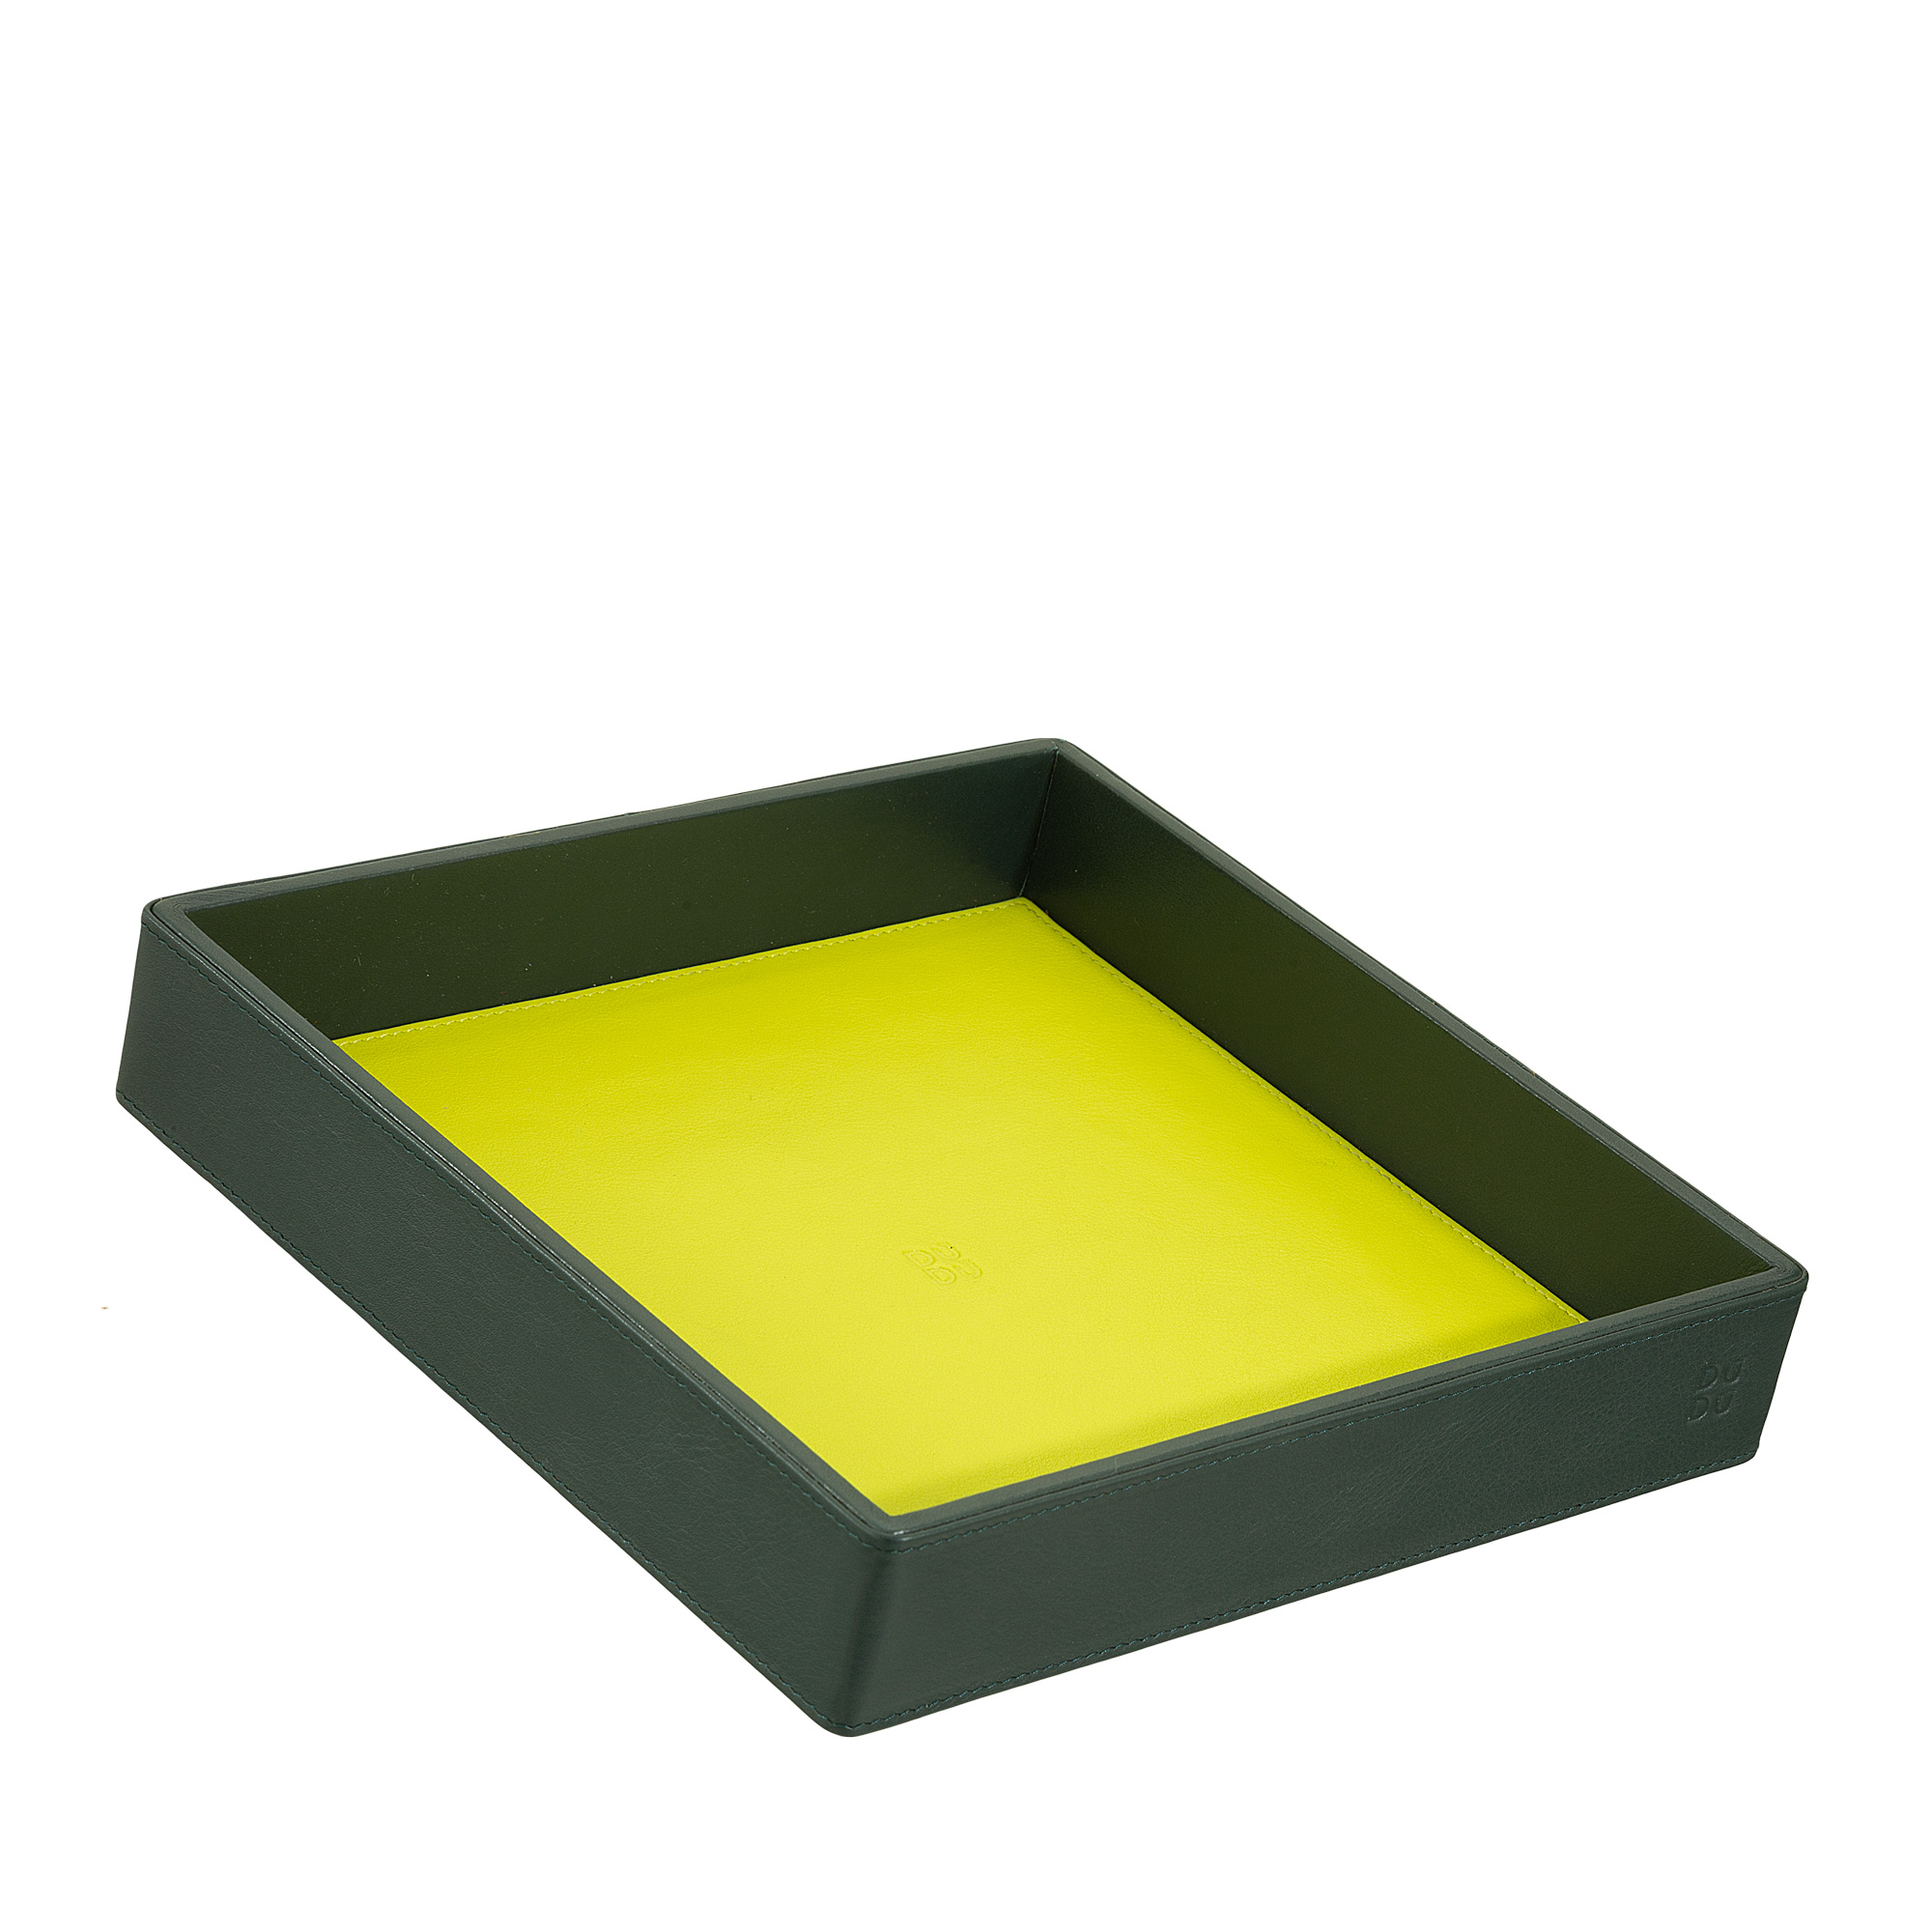 Colorful - Valet tray - Mangrove